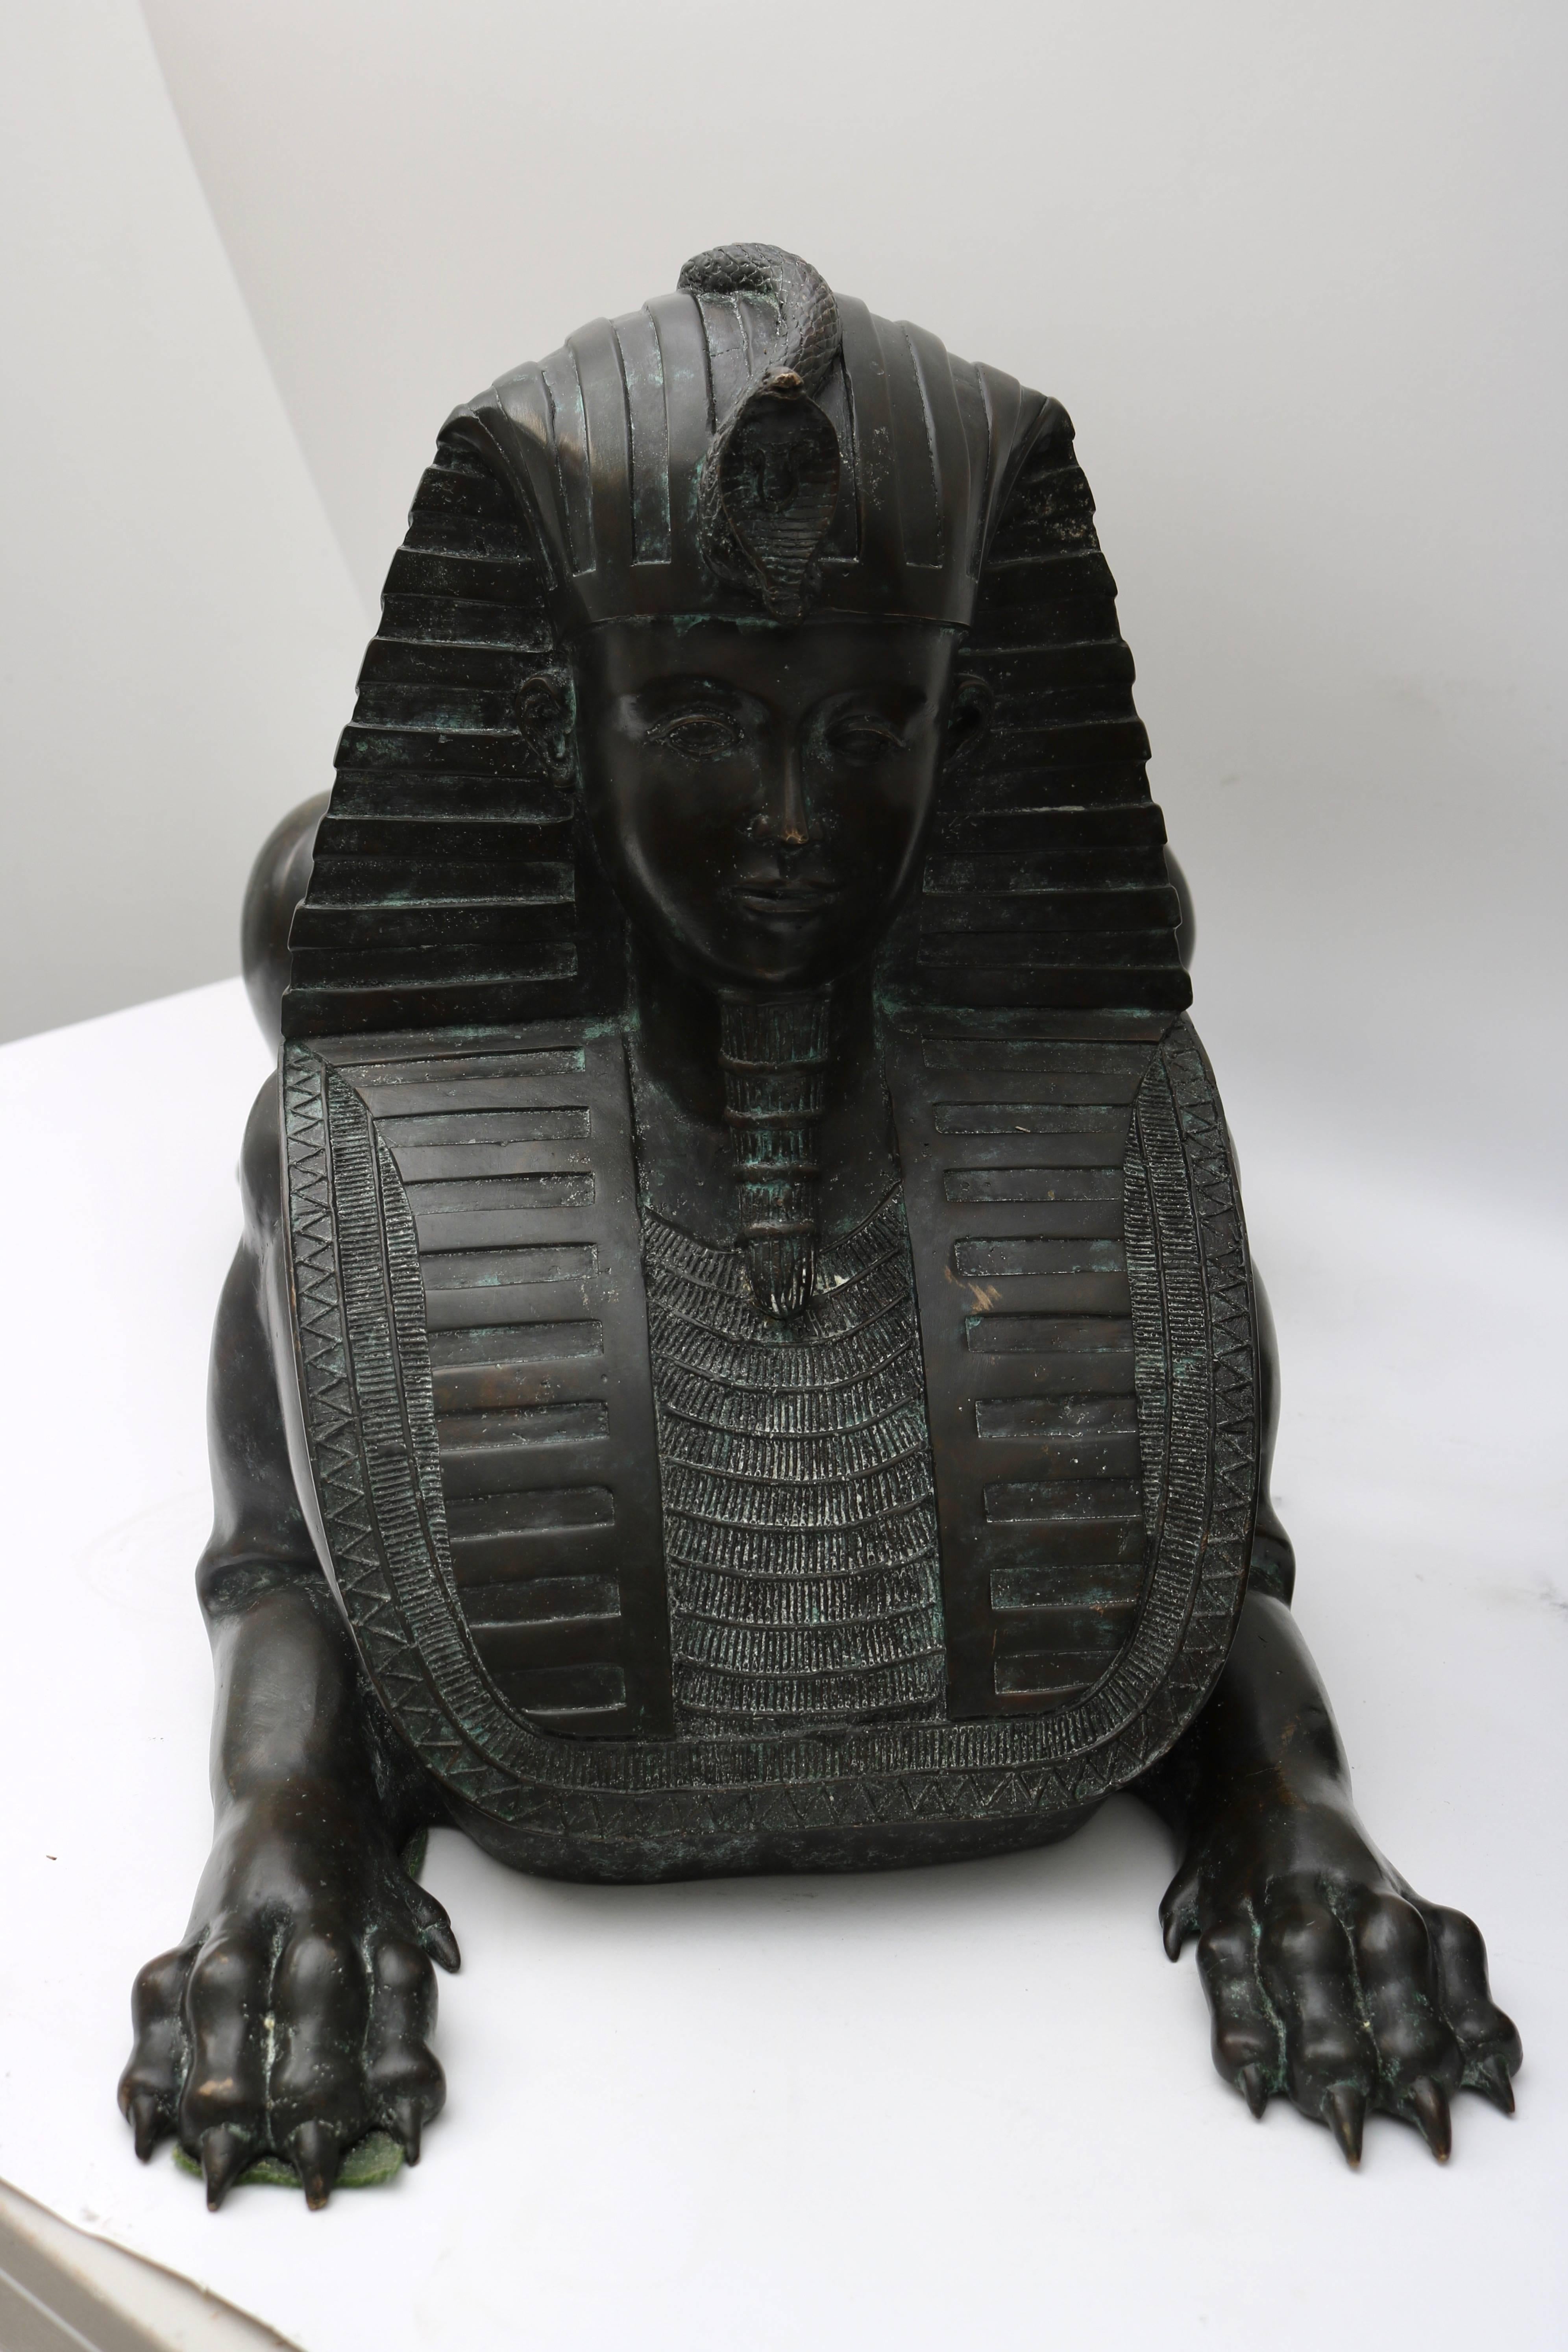 This stylish pair of bronze French Empire style sphinx were recently purchased from a Palm Beach estate and will make the perfect addition to you home or garden. They have a wonderful aged patina and if you will please see image #9 of the cobra that